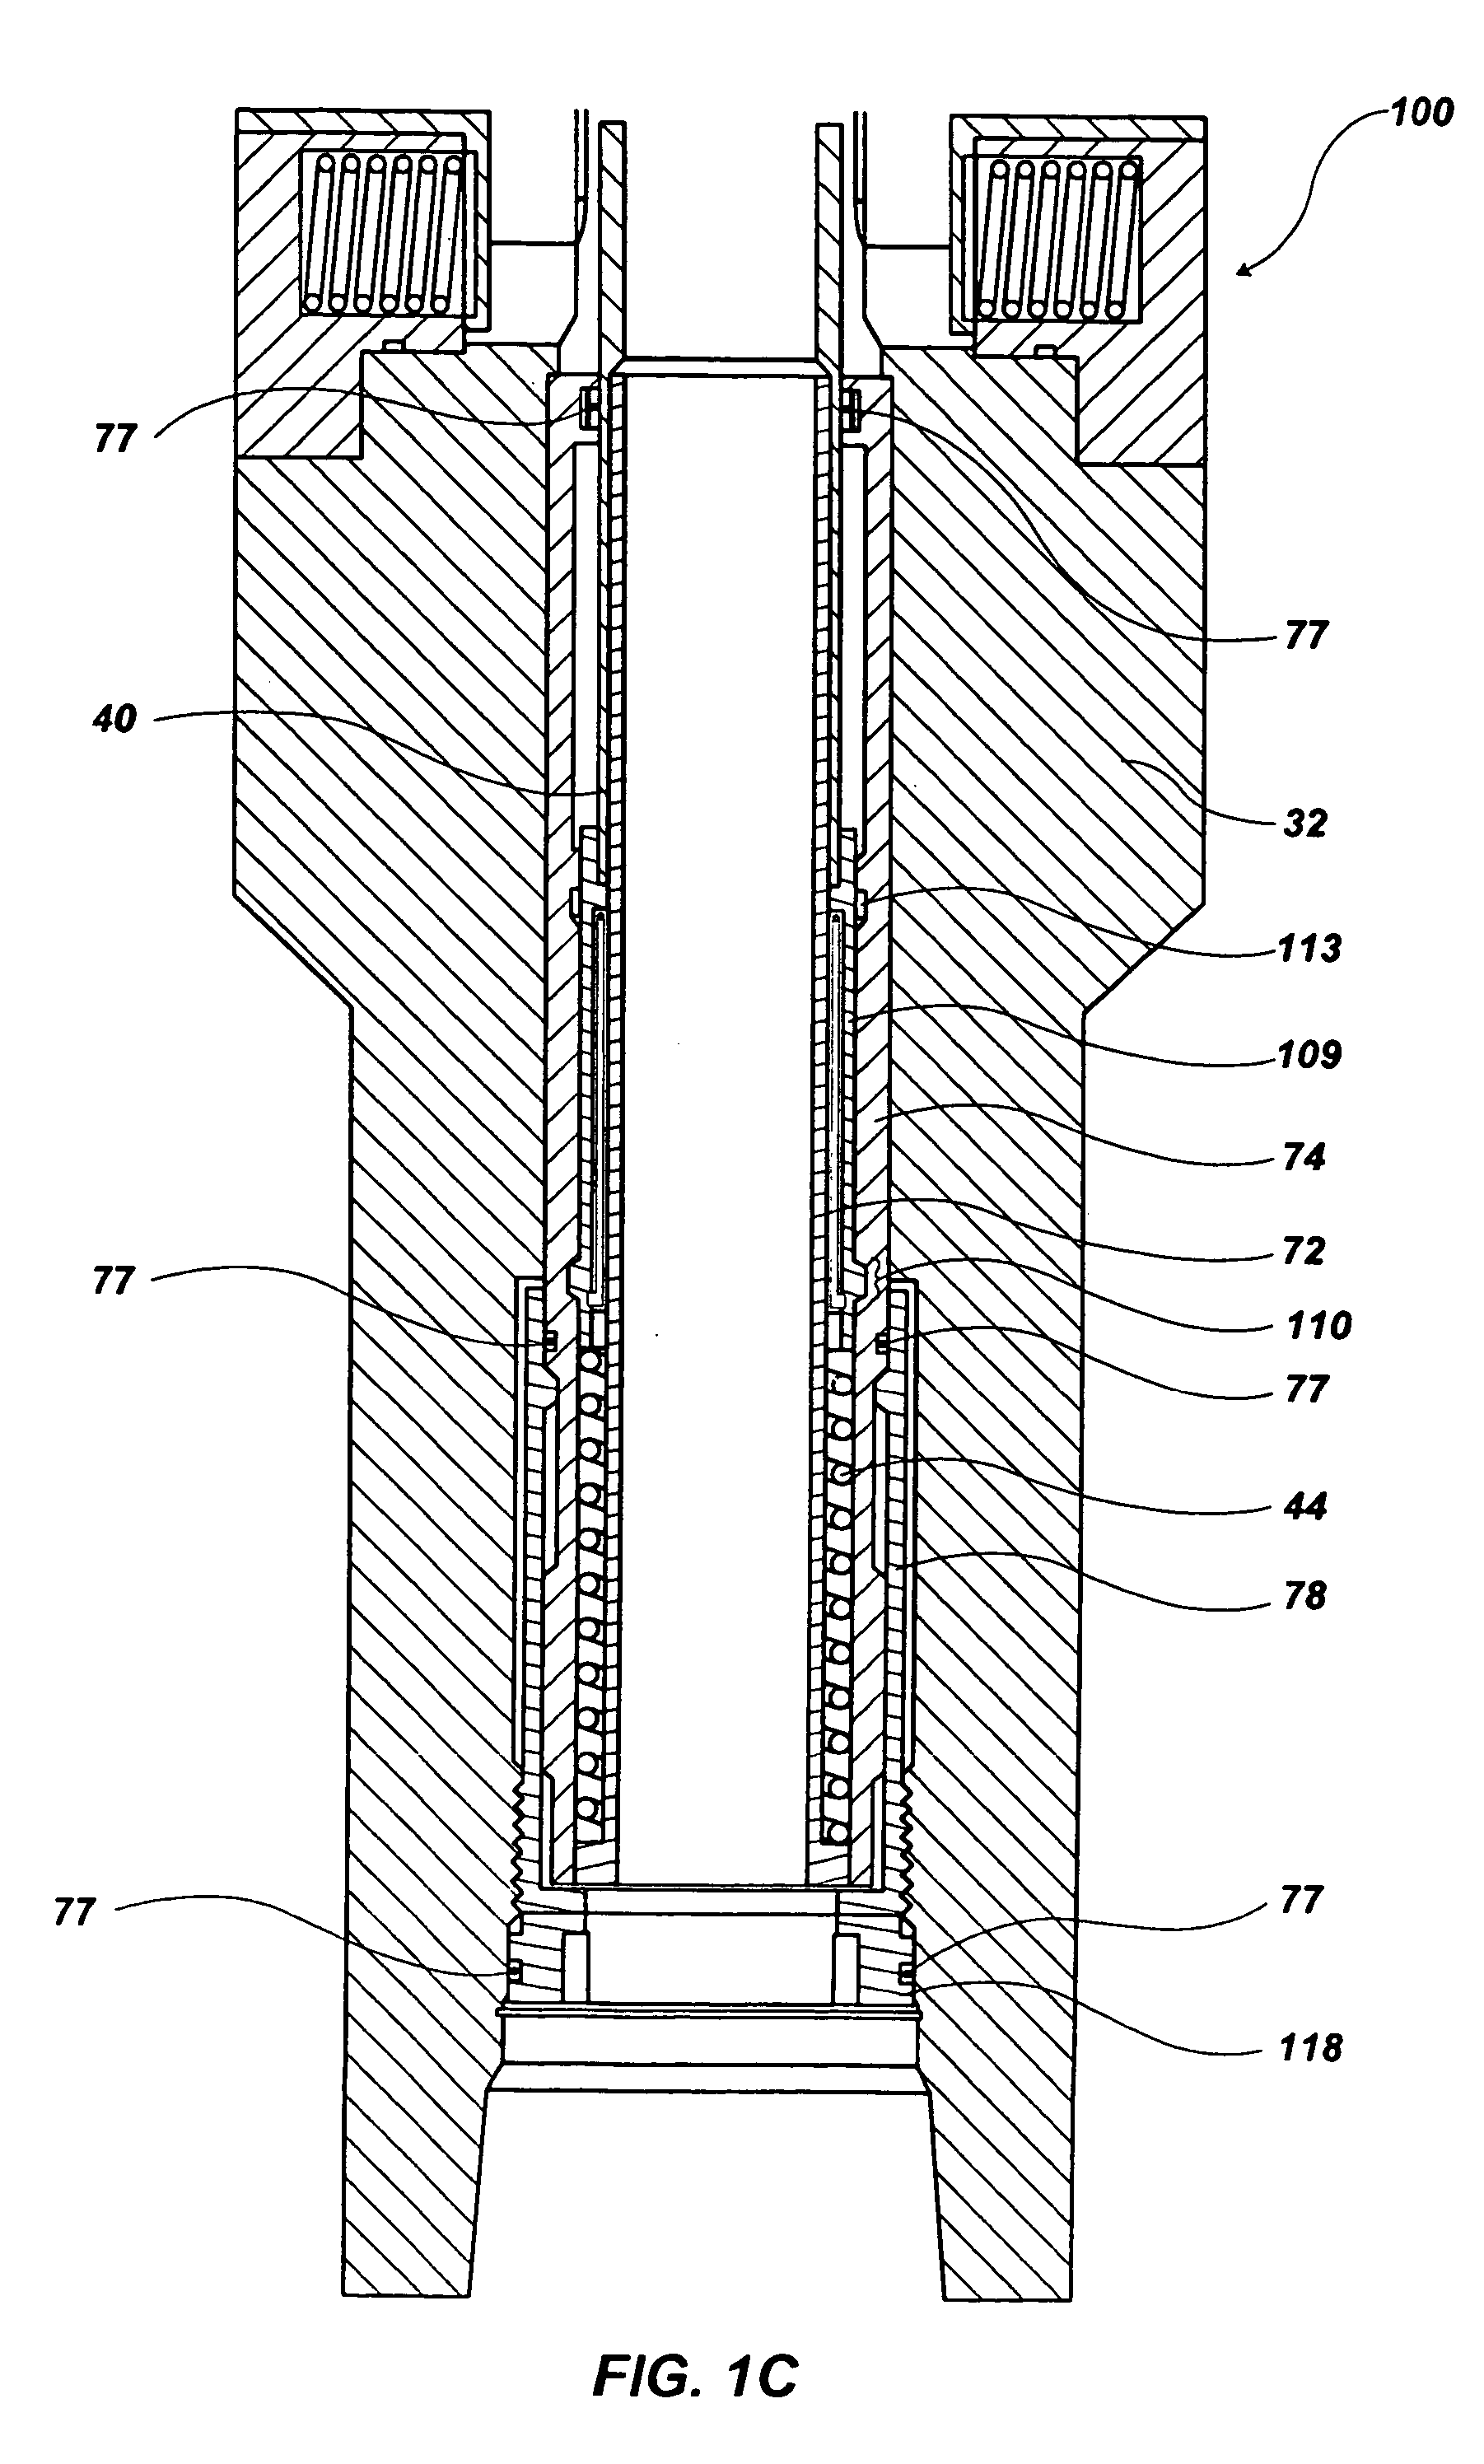 Expandable reamer apparatus for enlarging boreholes while drilling and methods of use